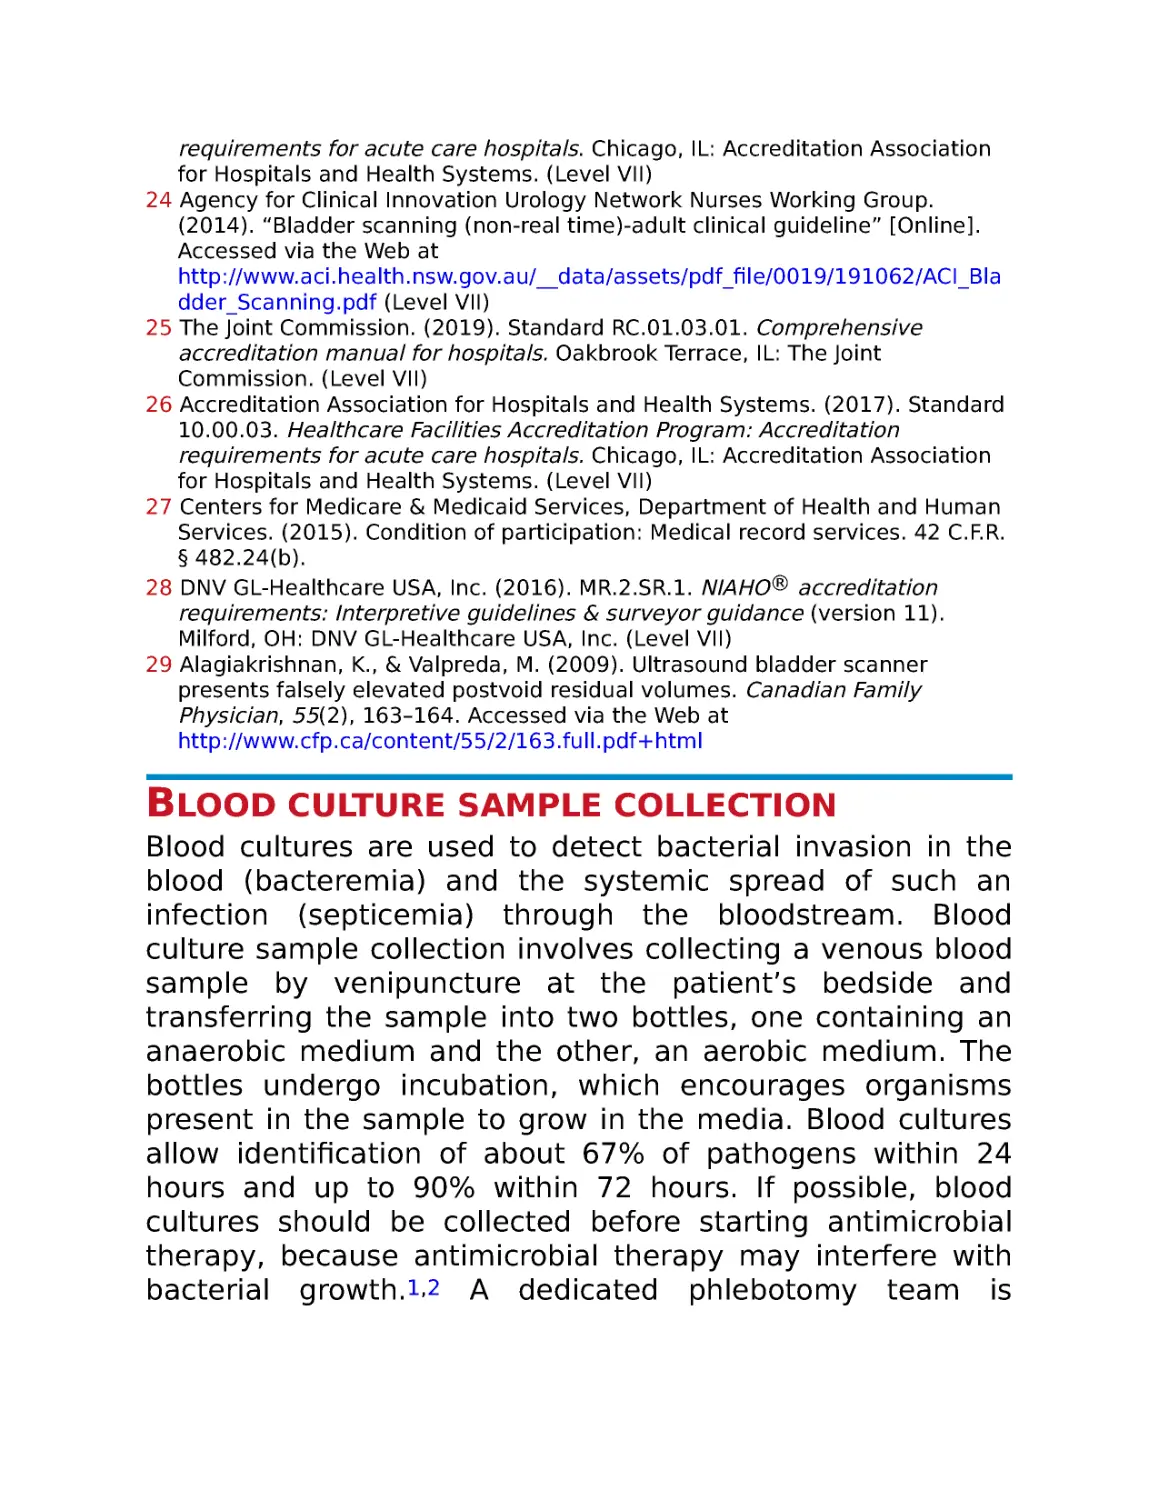 Blood culture sample collection